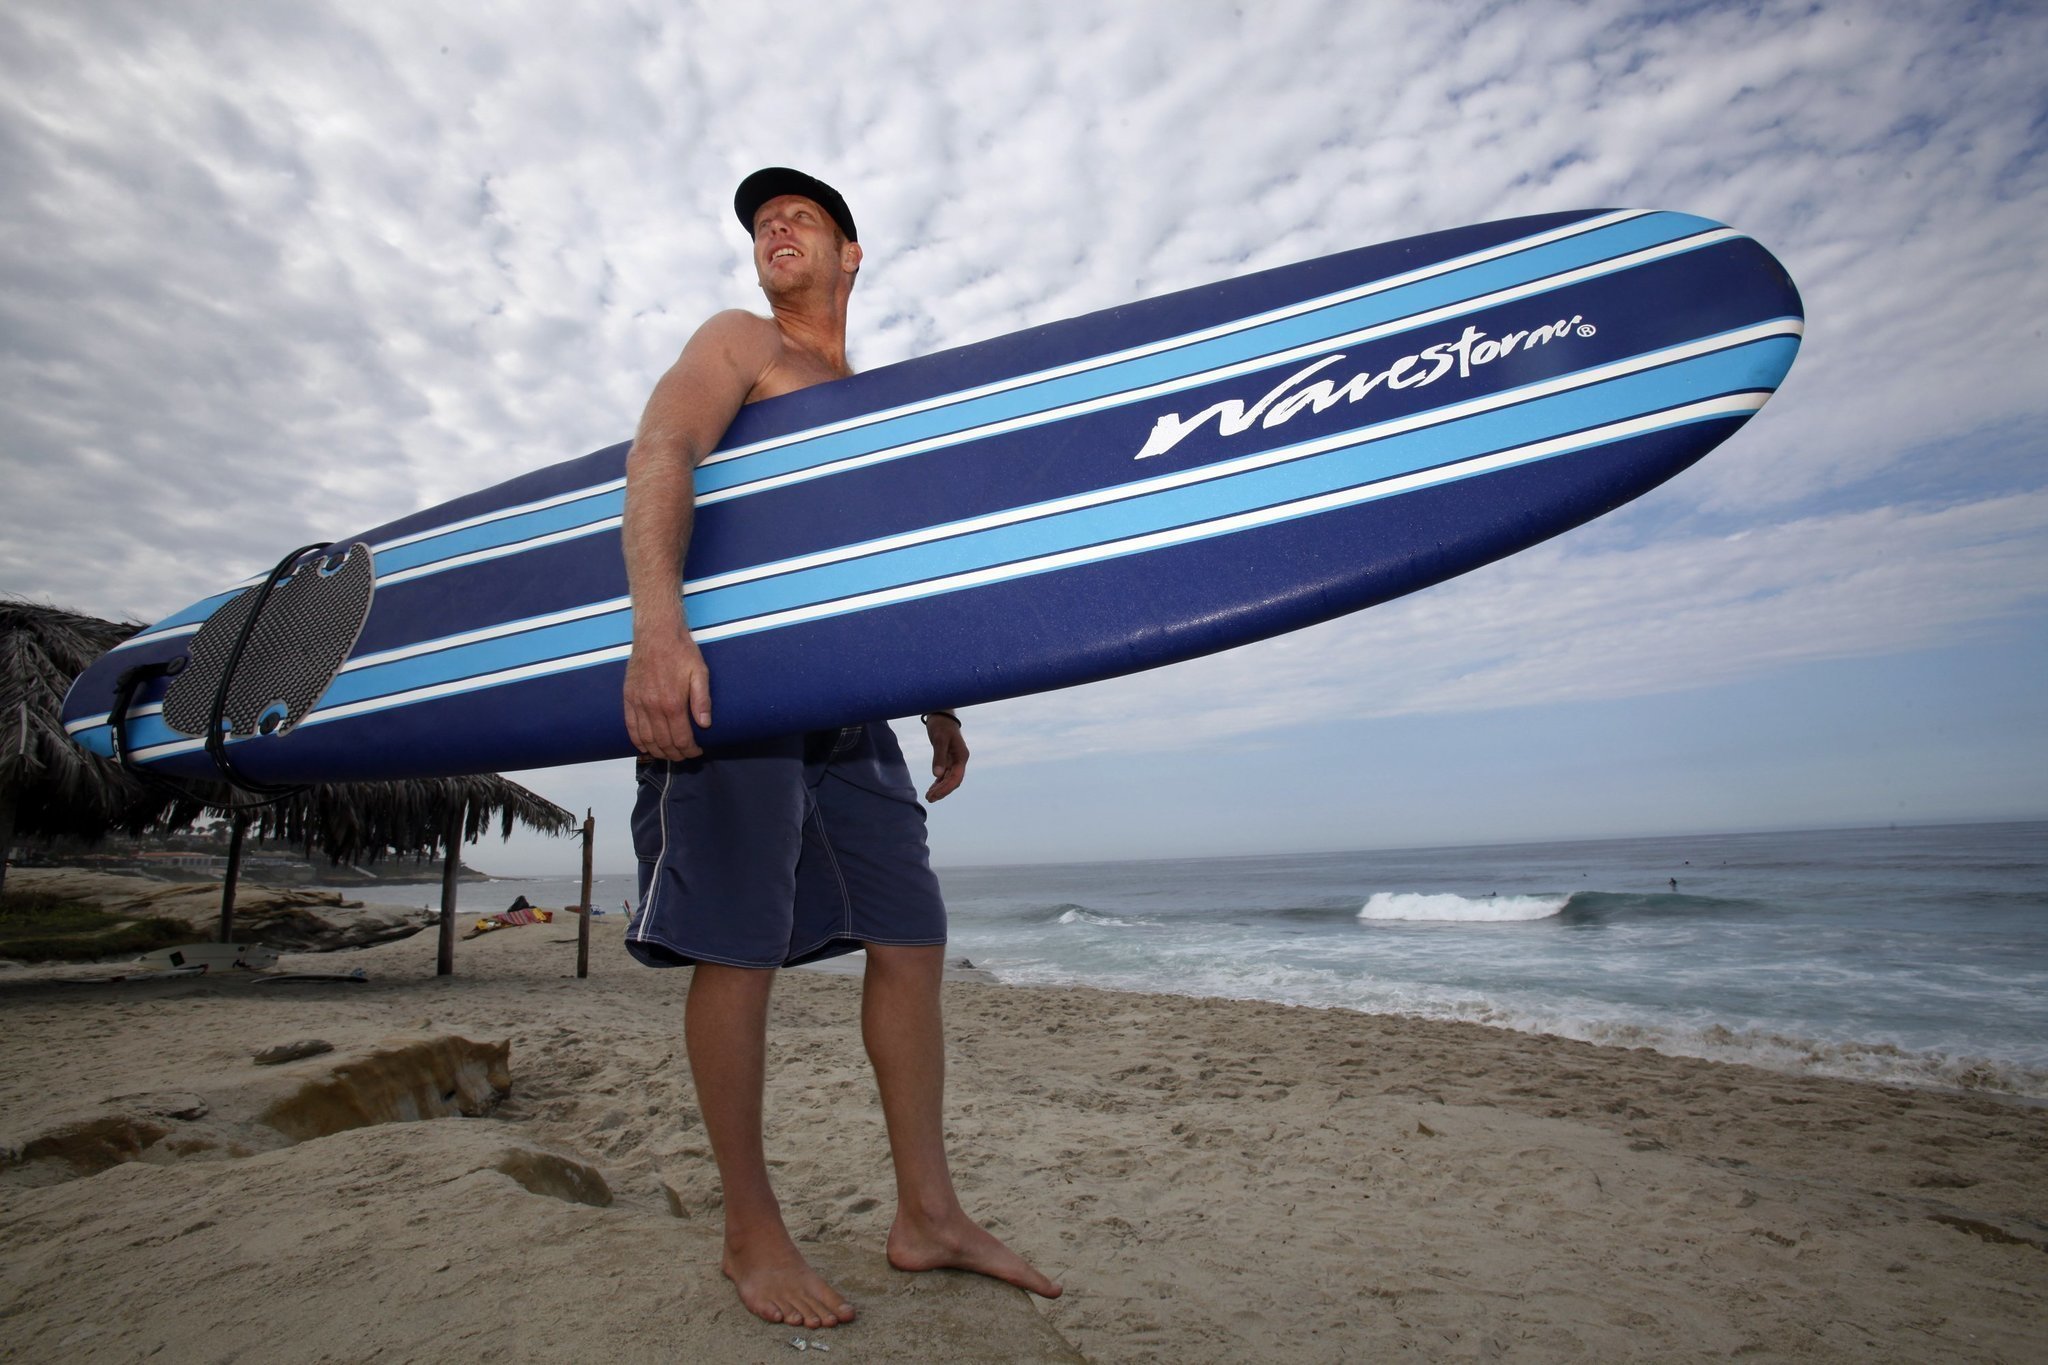 The Costco sold Wavestorm longboard is the most common board in the water